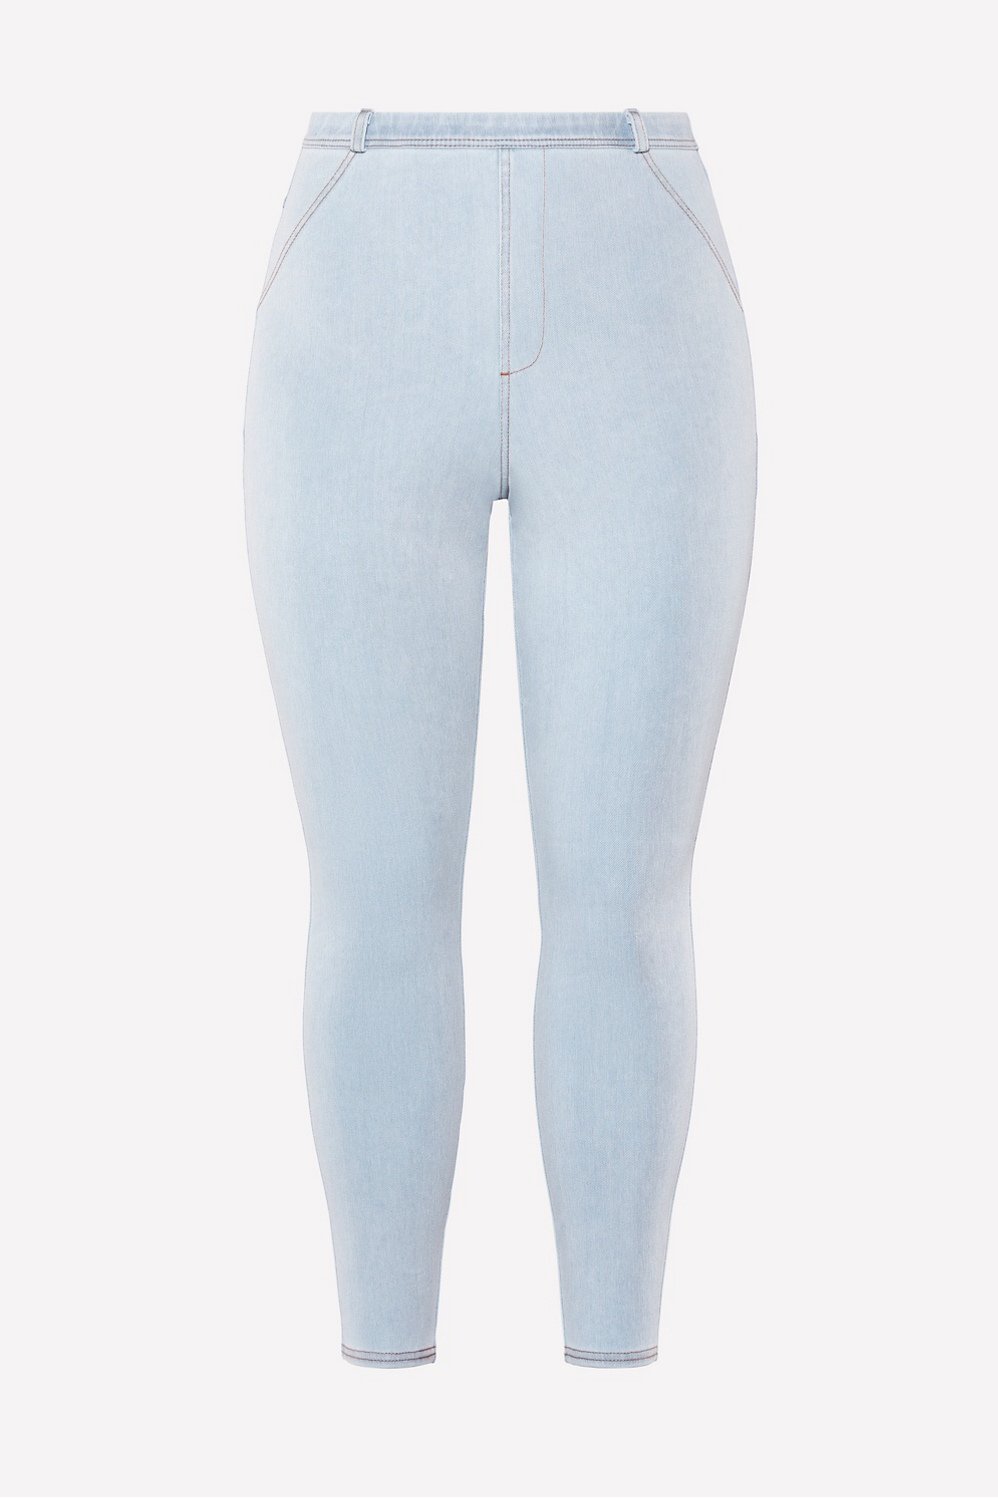 Shoppers ditch jeans for M&S £17.50 'slimming' leggings hailed as 'magic' -  Mirror Online